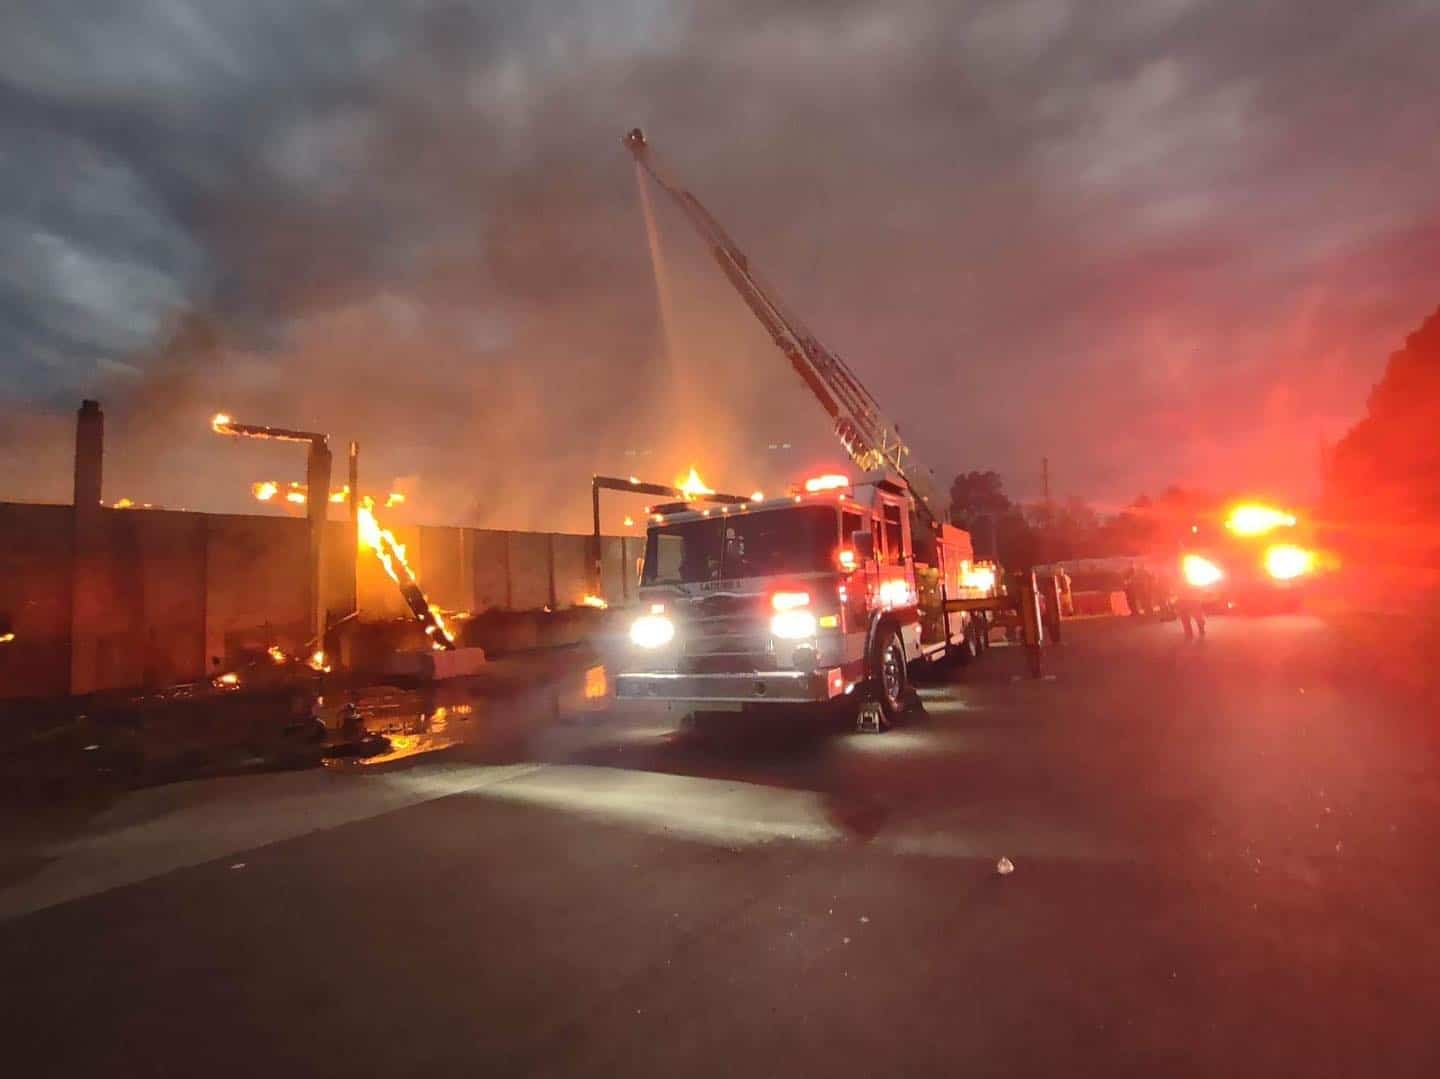 Fire rescue crews working to extinguish the fire at Hernando County Recycling Center on April 8, 2023. Photo Courtesy of the Hernando County Fire Rescue